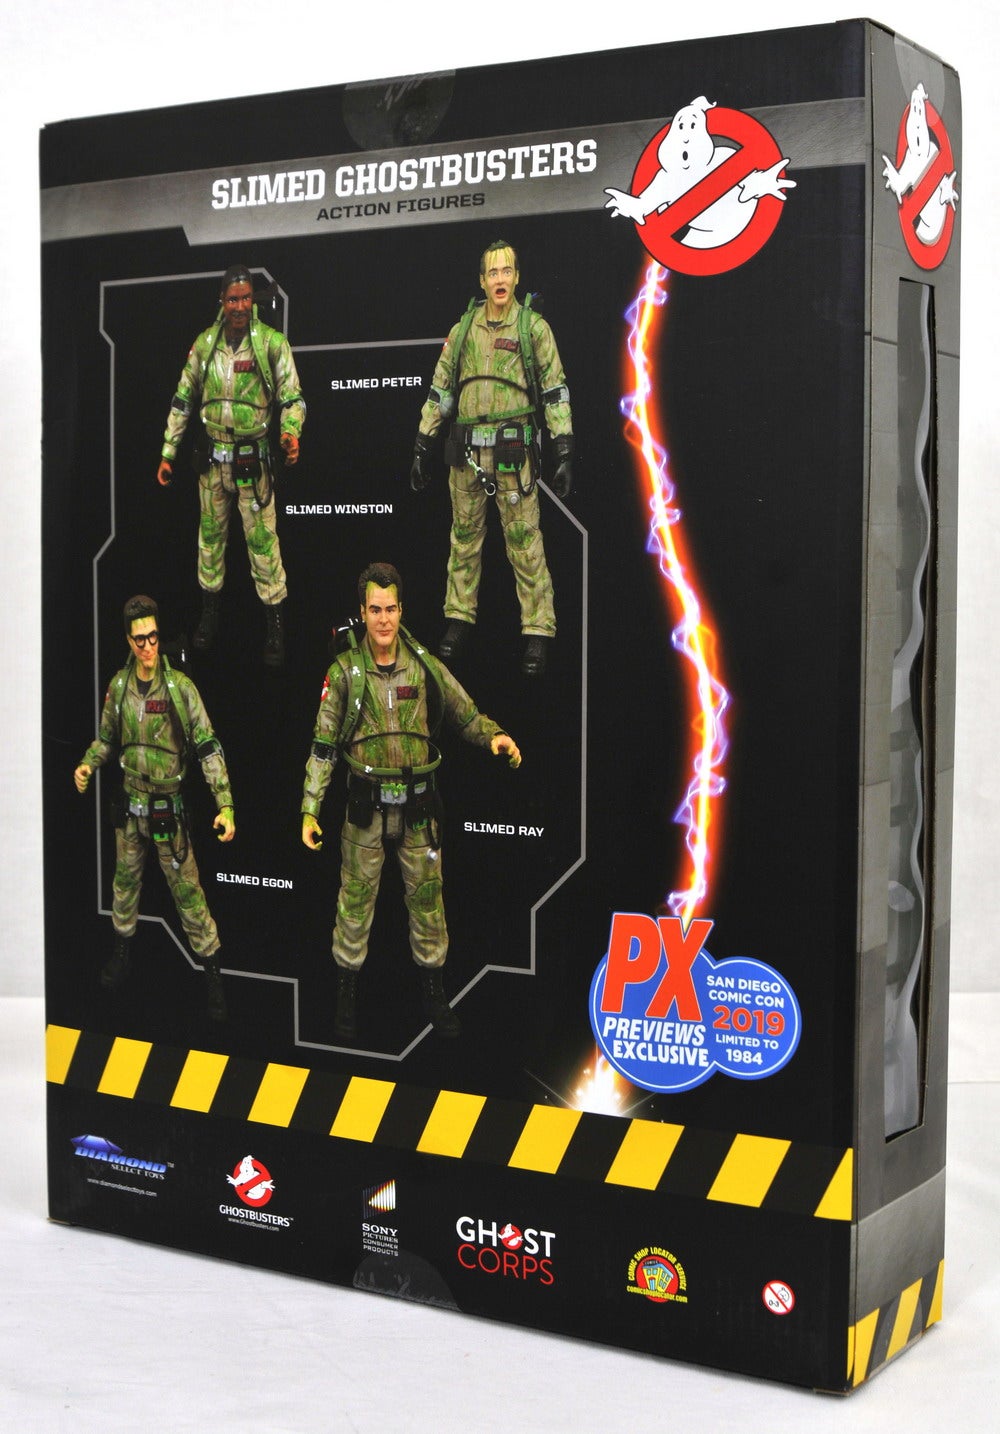 Ghostbusters-ActionFigure-BoxSet